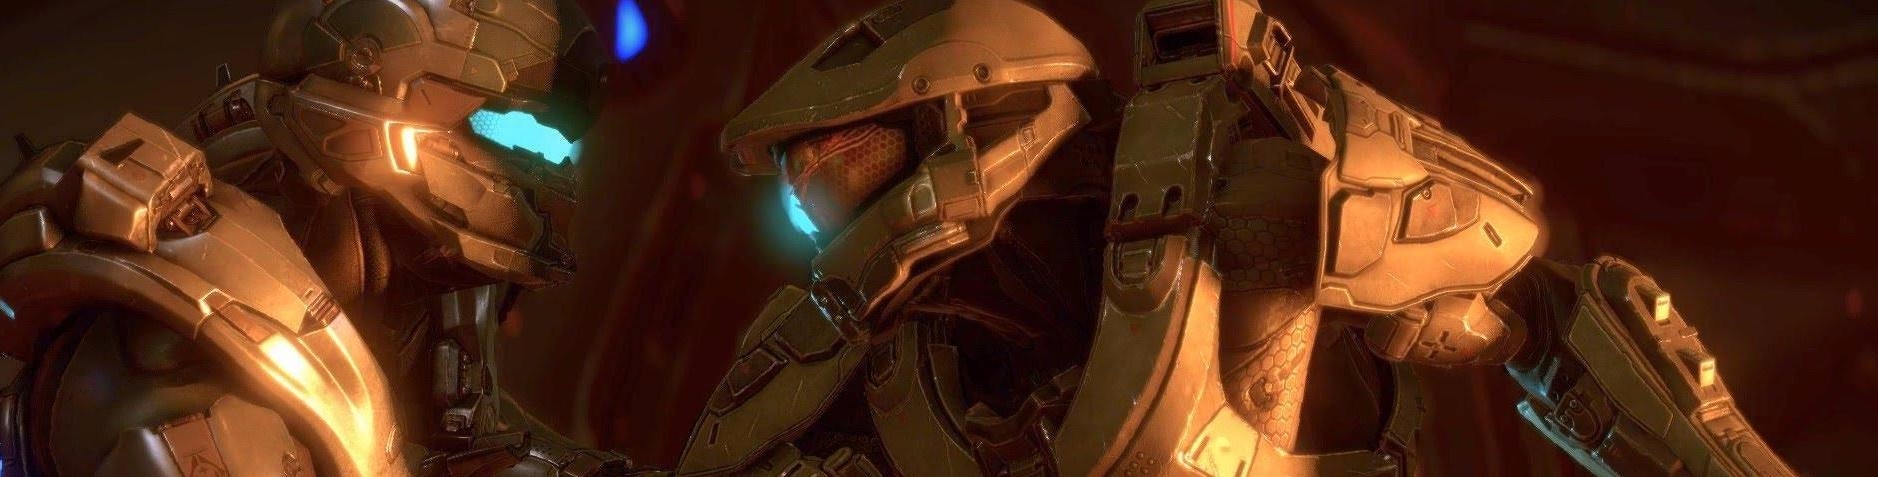 Image for Why Halo's biggest problem may be Halo itself